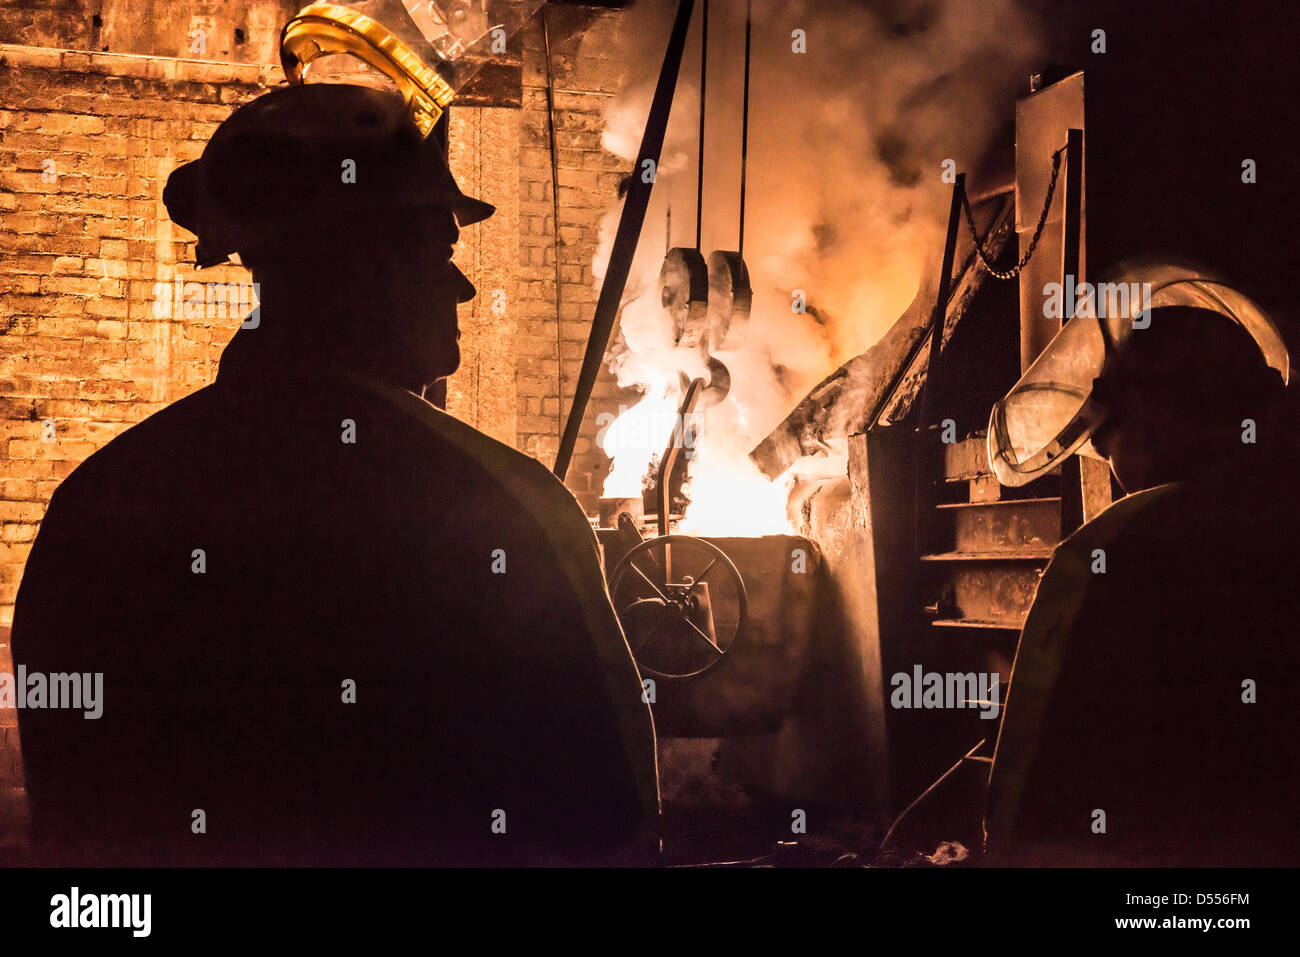 Worker standing in metal foundry Banque D'Images